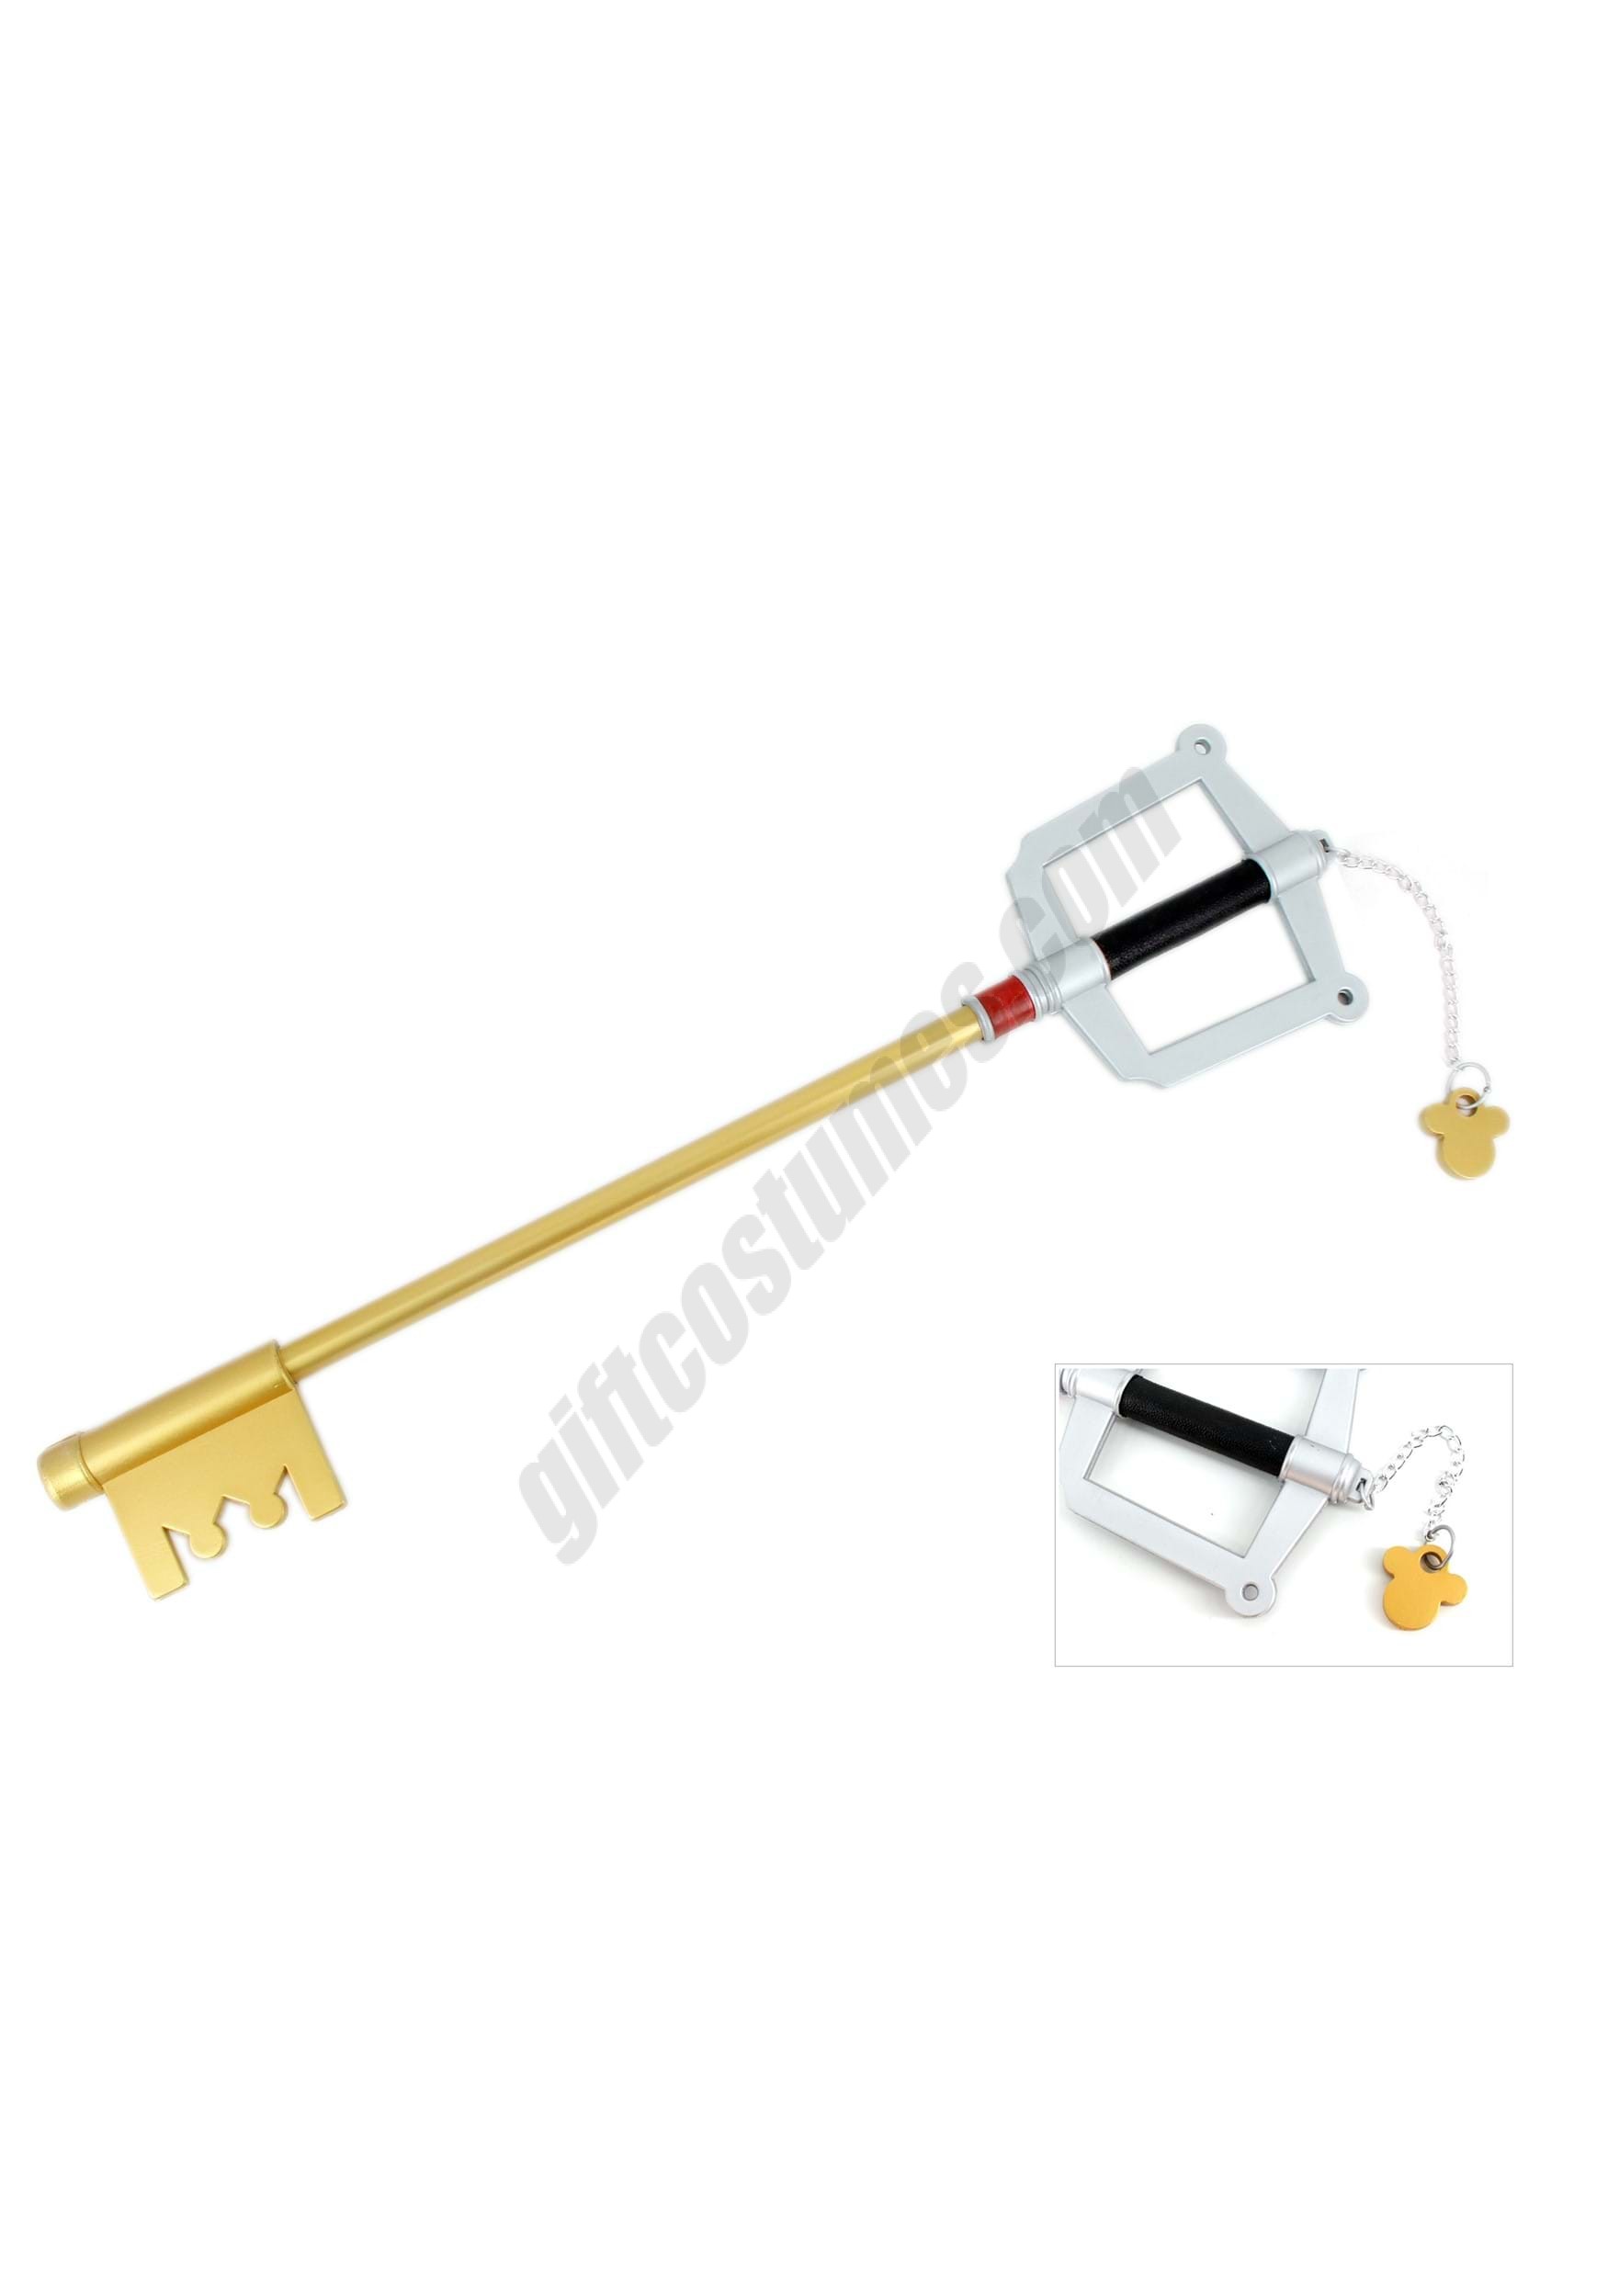 King Mickey's Keyblade from Kingdom Hearts Promotions - King Mickey's Keyblade from Kingdom Hearts Promotions